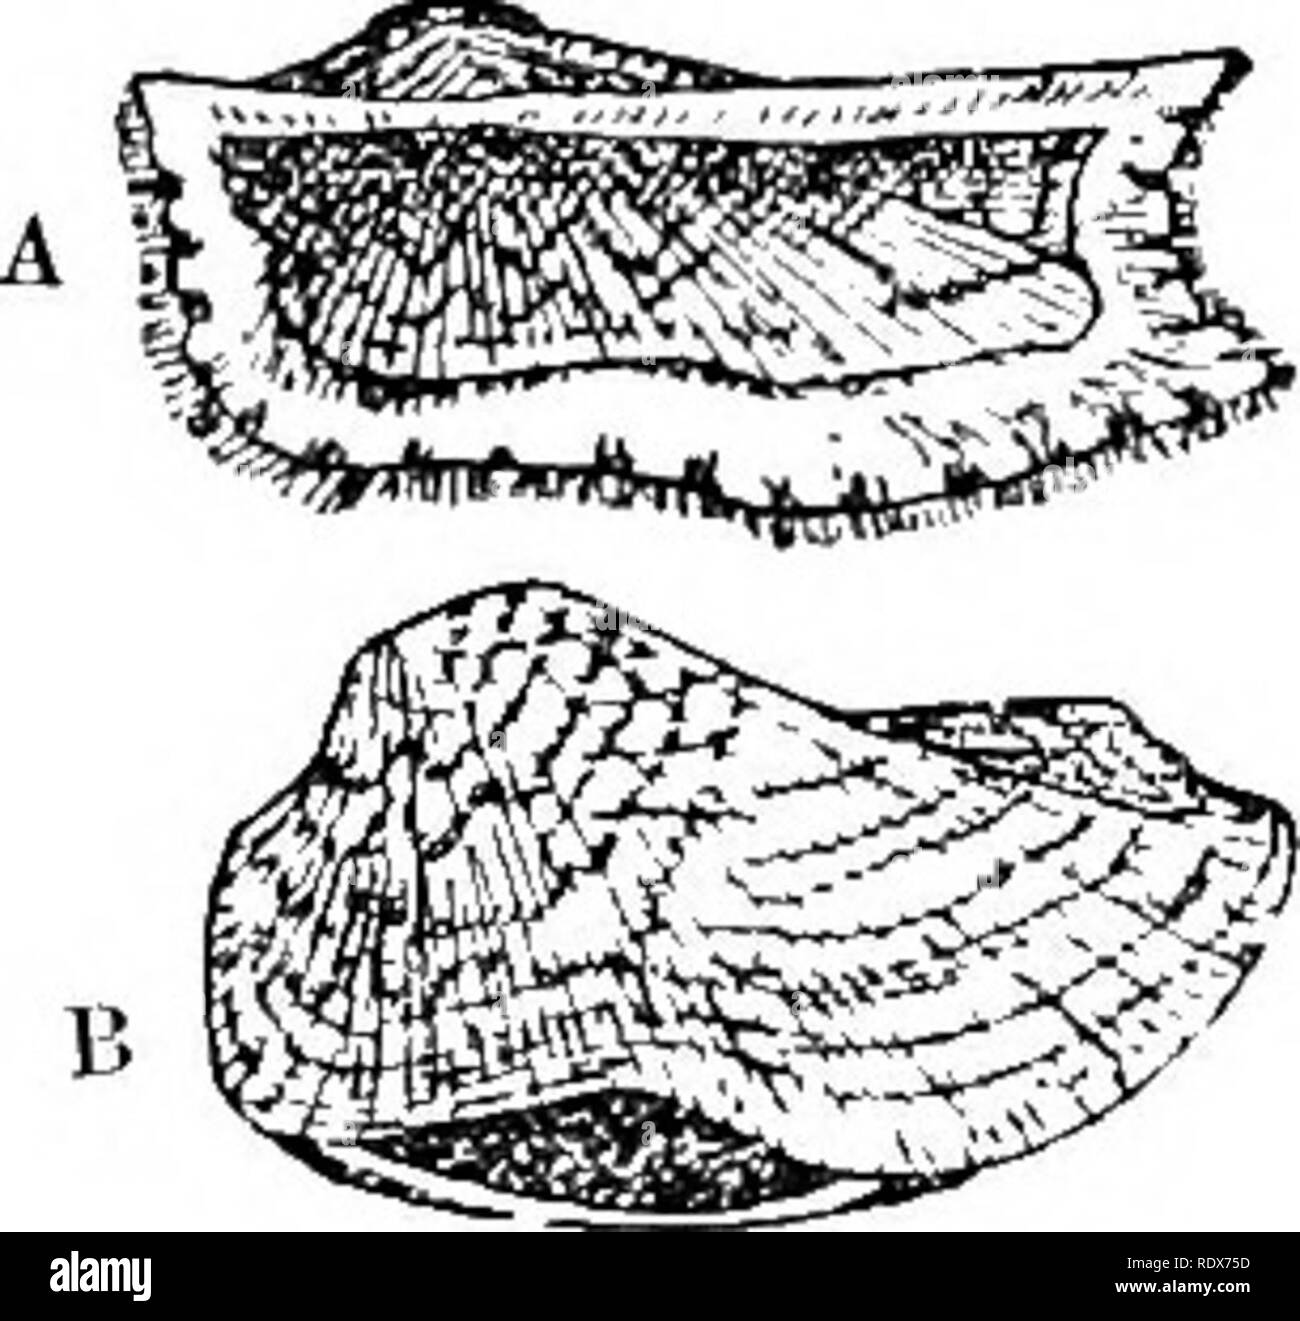 . Natural history. Zoology. BIVALVES—ARA'S, NUT-SHELLS, ETC. 621 silium borne in a small triangular pit in the middle. The umbonea are directed backwards. Their close allies, Lcda and Yoldia, are elongate, and have fewer and more prominent teeth, and a more prominent ligament pit. The family is one of the oldest known, dating back to the earliest geological times, and its modern representatives are found in all seas. The SoLENOMTli).^ comprise a single genus Solenomya, and are remarkable for being without teeth in the hinge, and in having the perioatracum greatly prolonged beyond the margin of Stock Photo